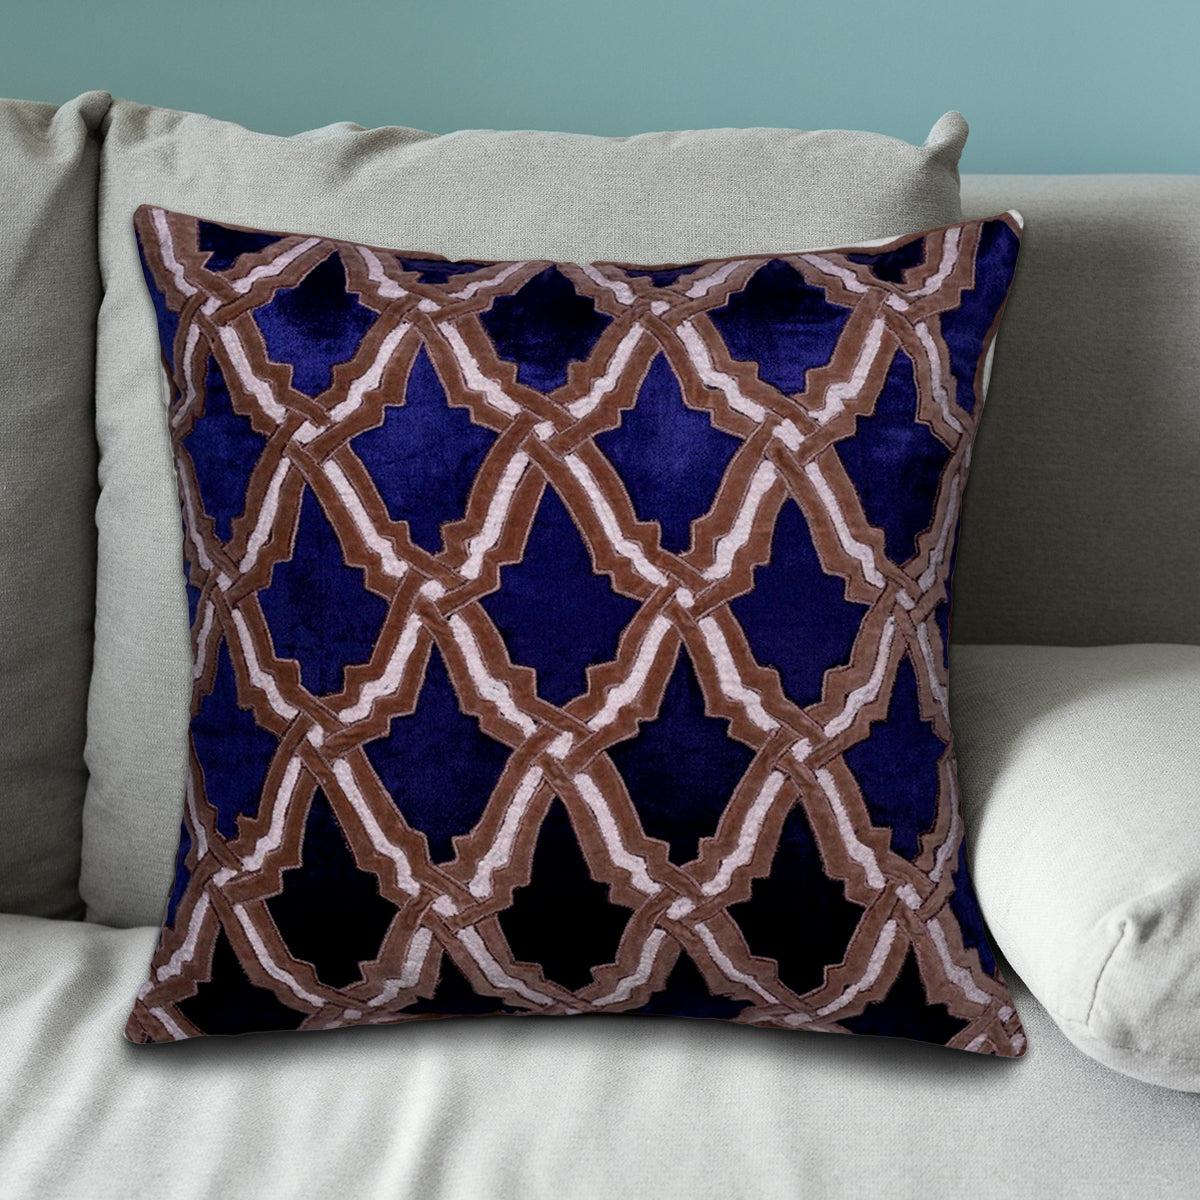 Navy Blue Throw Pillow Covers - Set of 2 and 4, 18 x 18 inches - Decozen